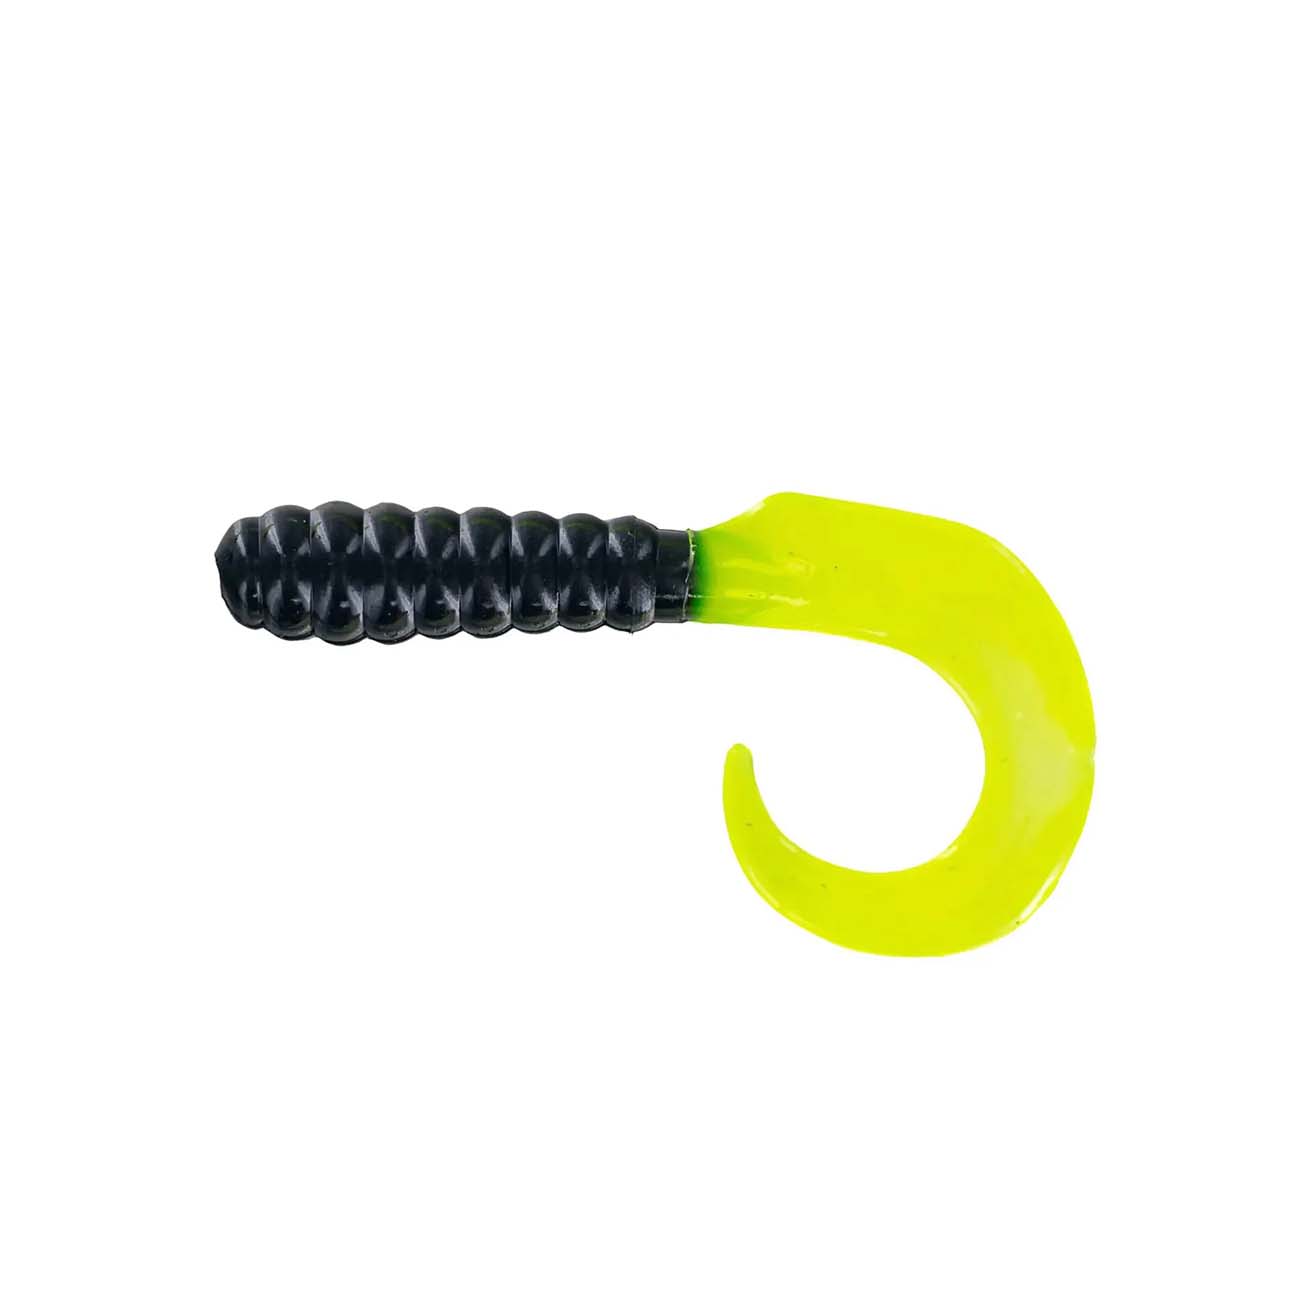 Buy ActiveCraft Sculpin Swimbait Pack: 1/2 oz Weedless Soft